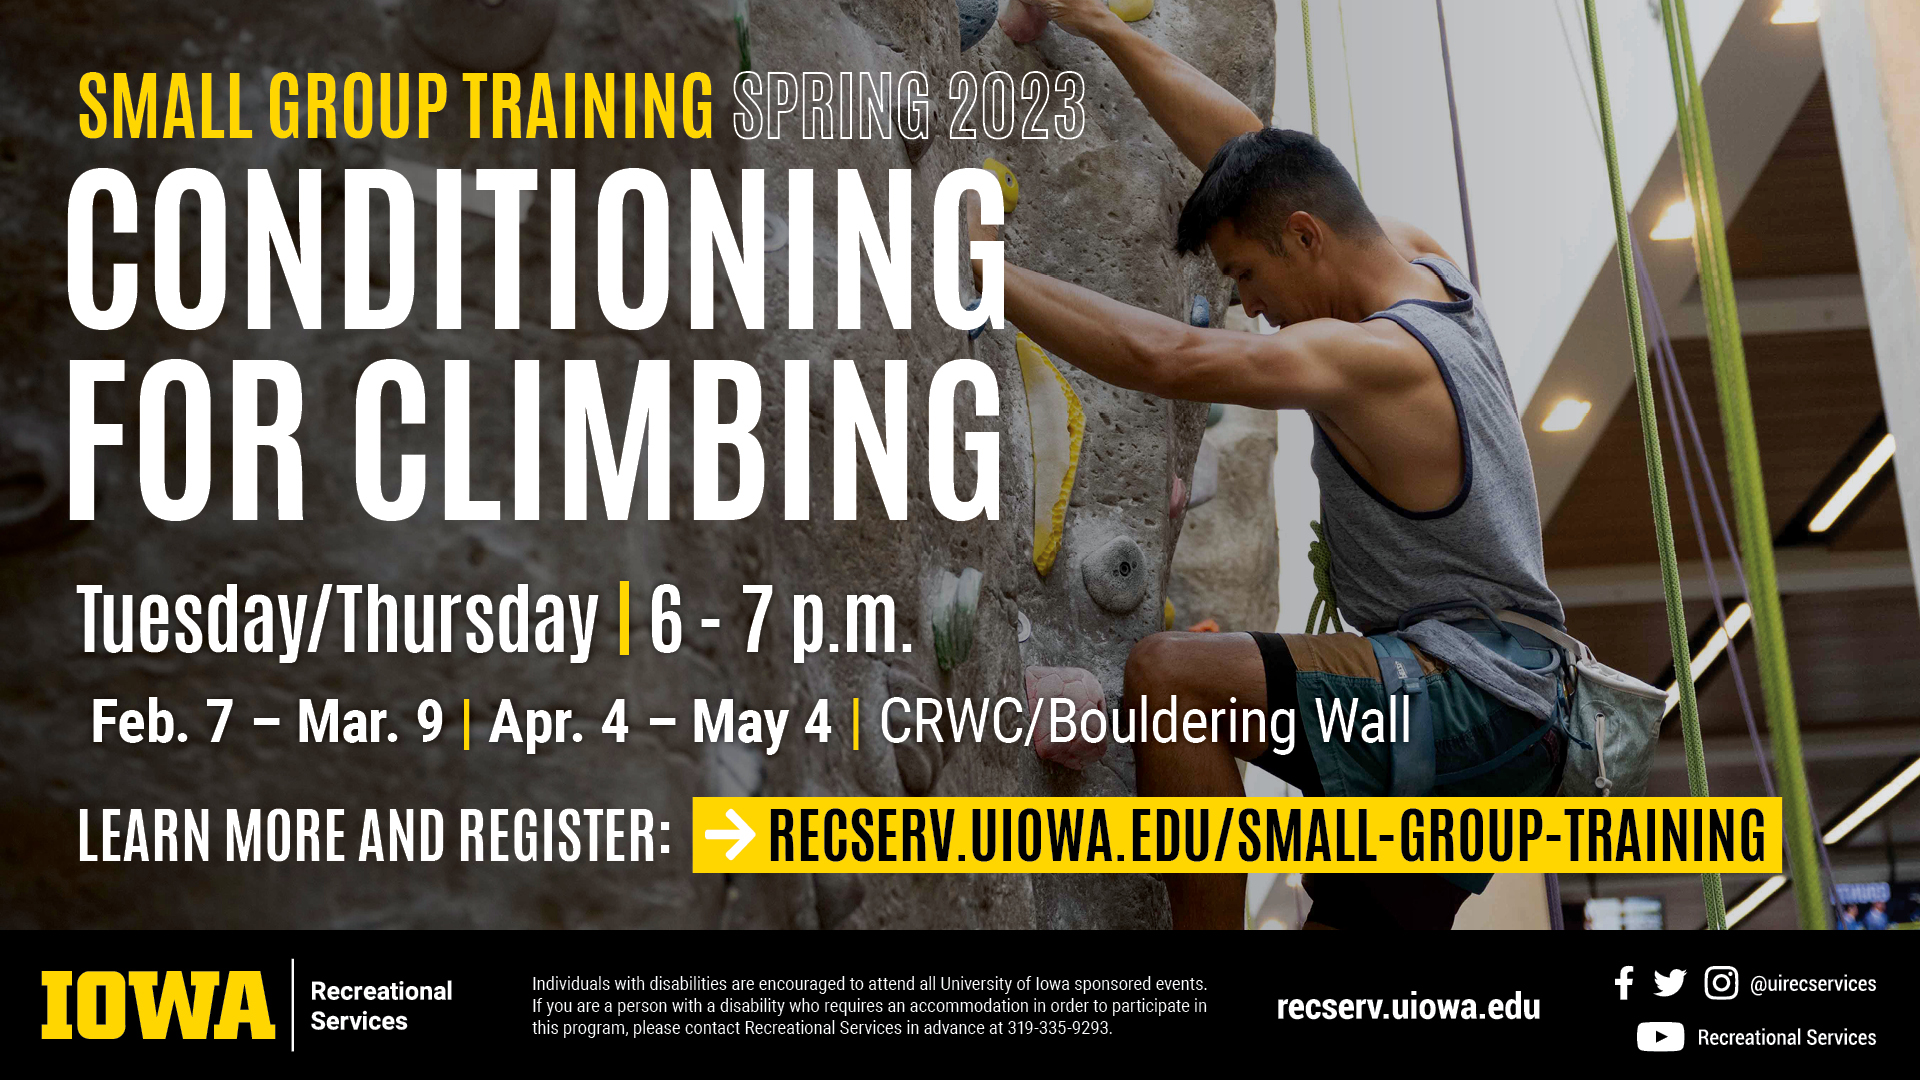 Conditioning for Climbing Tues/Thurs from 6-7pm Feb 7-March 9 | Apr 4-May4th Learn more and register at recserv.uiowa.edu/small-group-training